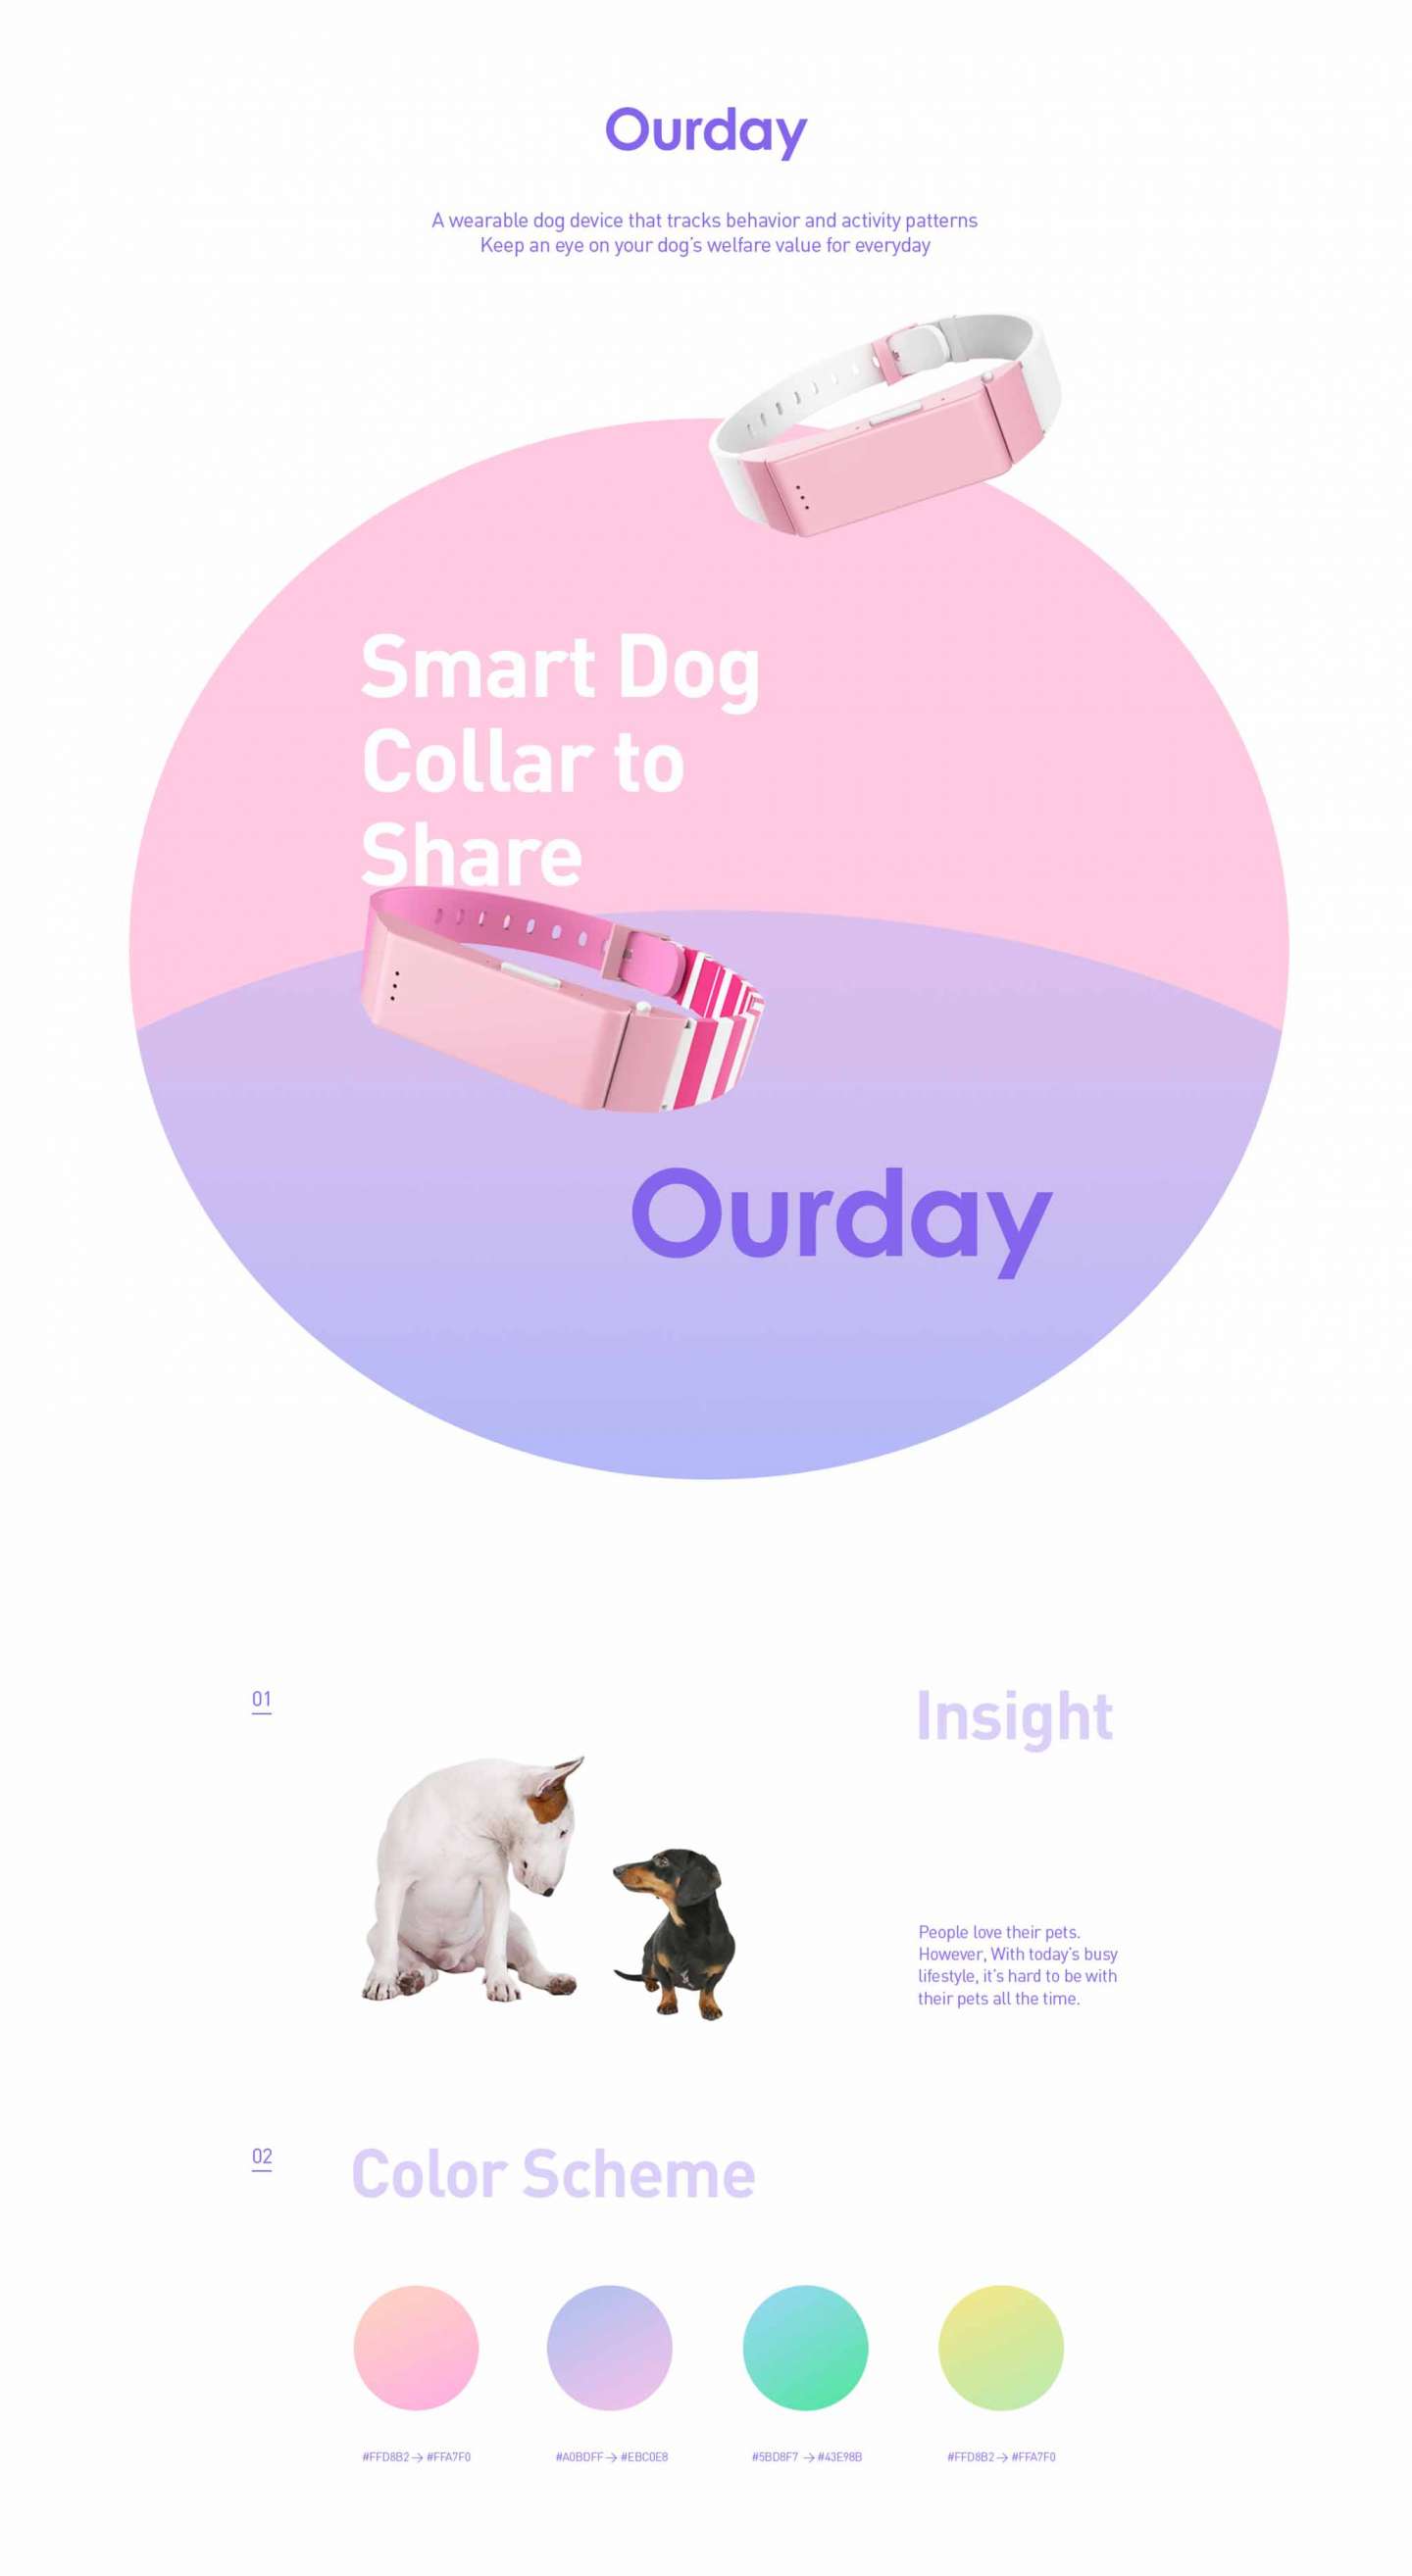 Smart Dog Collar to Share Ourday